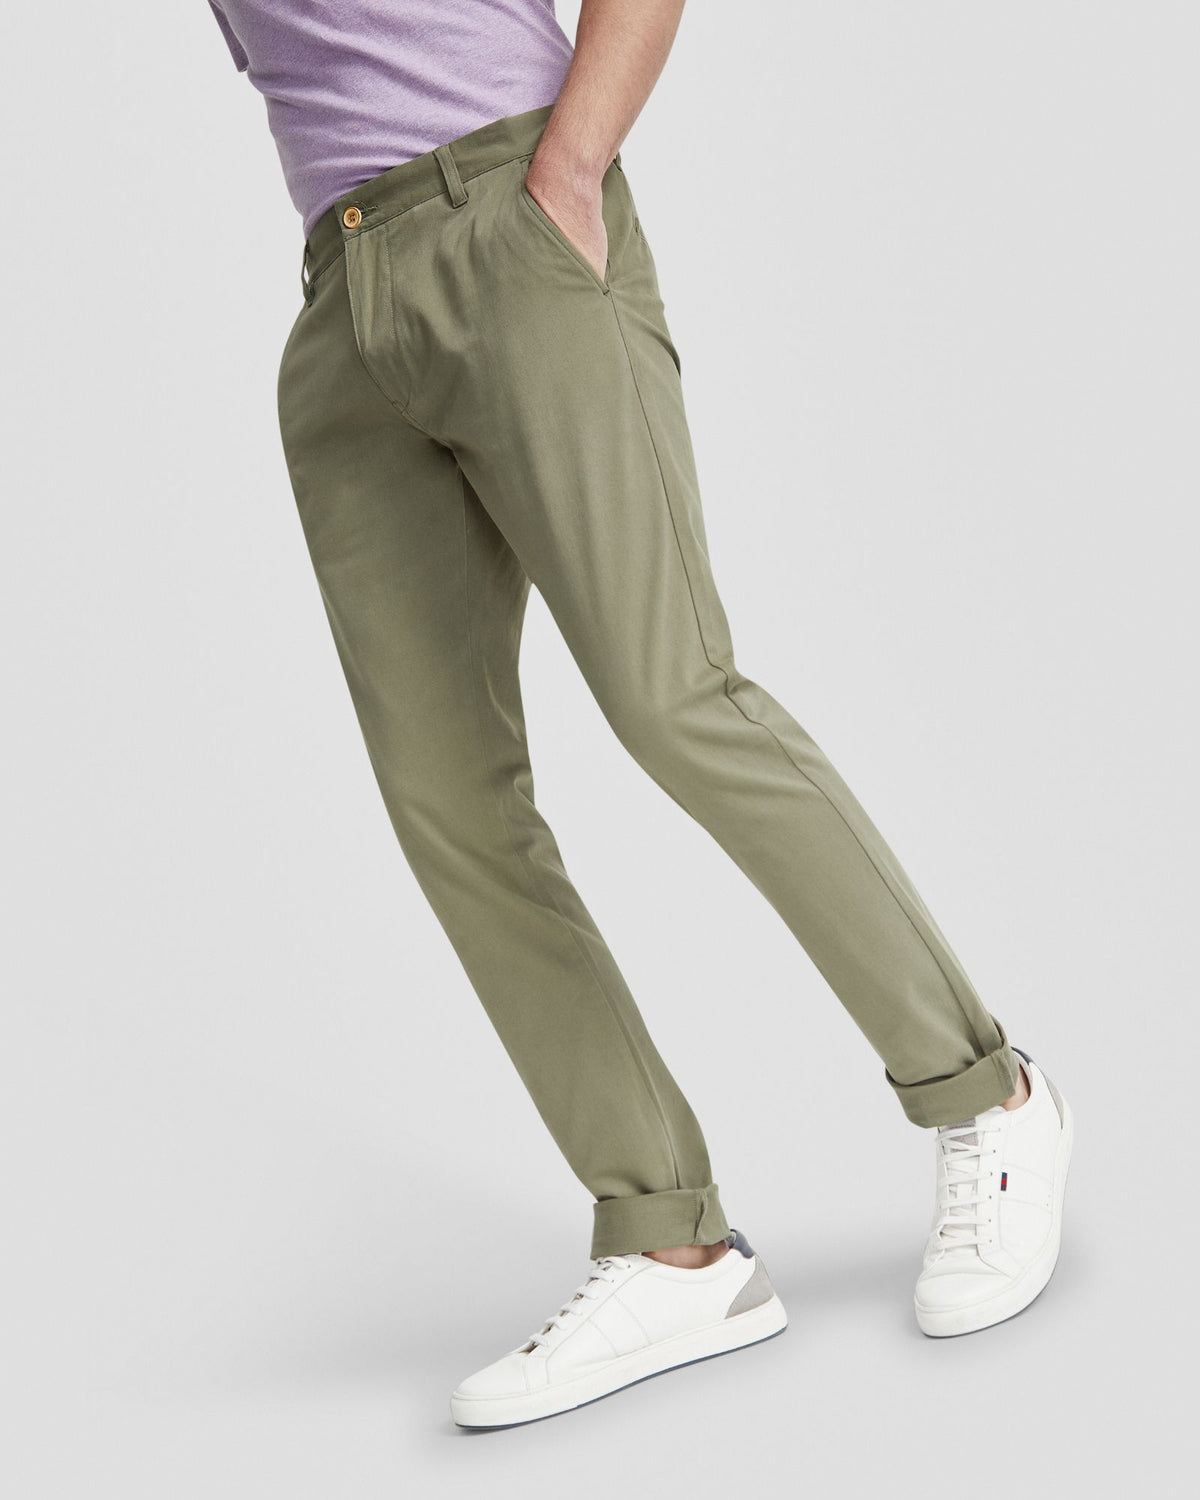 STRETCH SKINNY FIT CHINO MENS TROUSERS